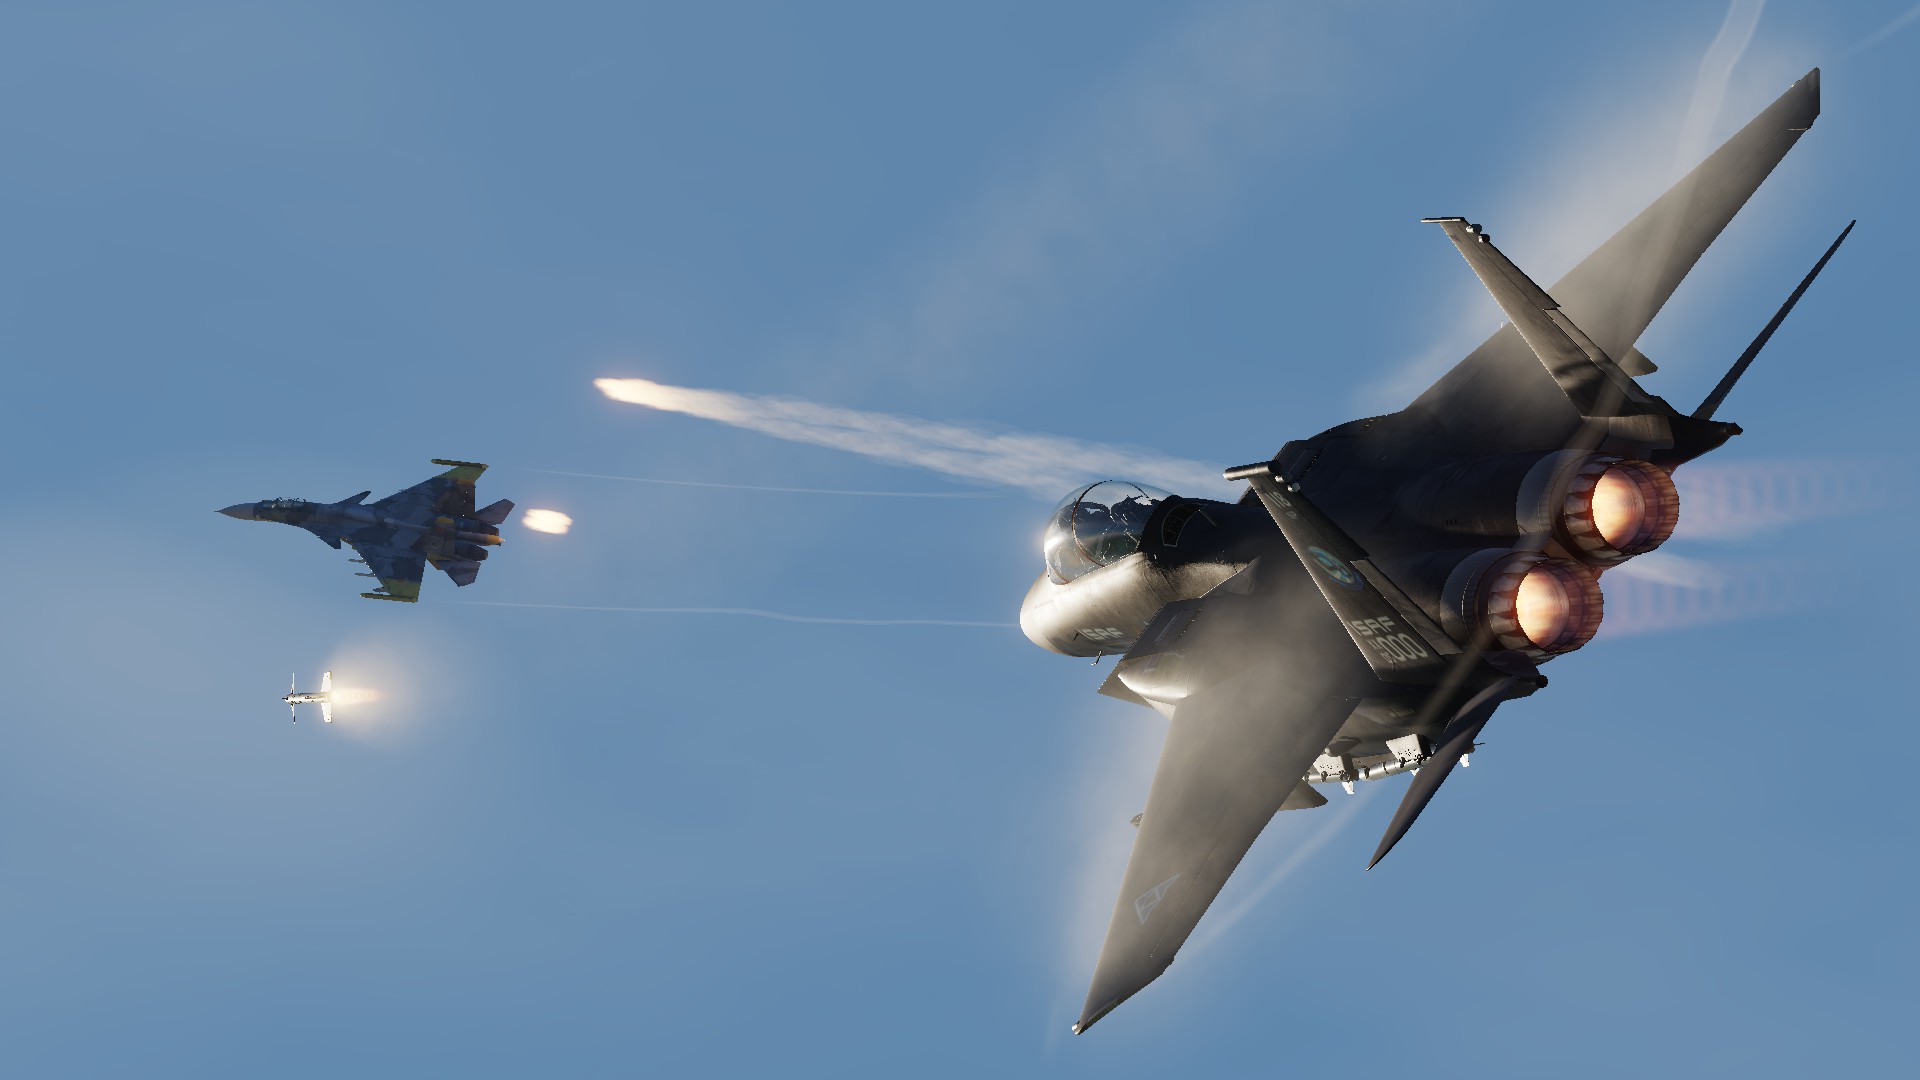 F-15E Mobius 1 (Ace Combat 04 F-15S/MTD skin) DOWNLOAD BROKEN, WILL BE FIXED